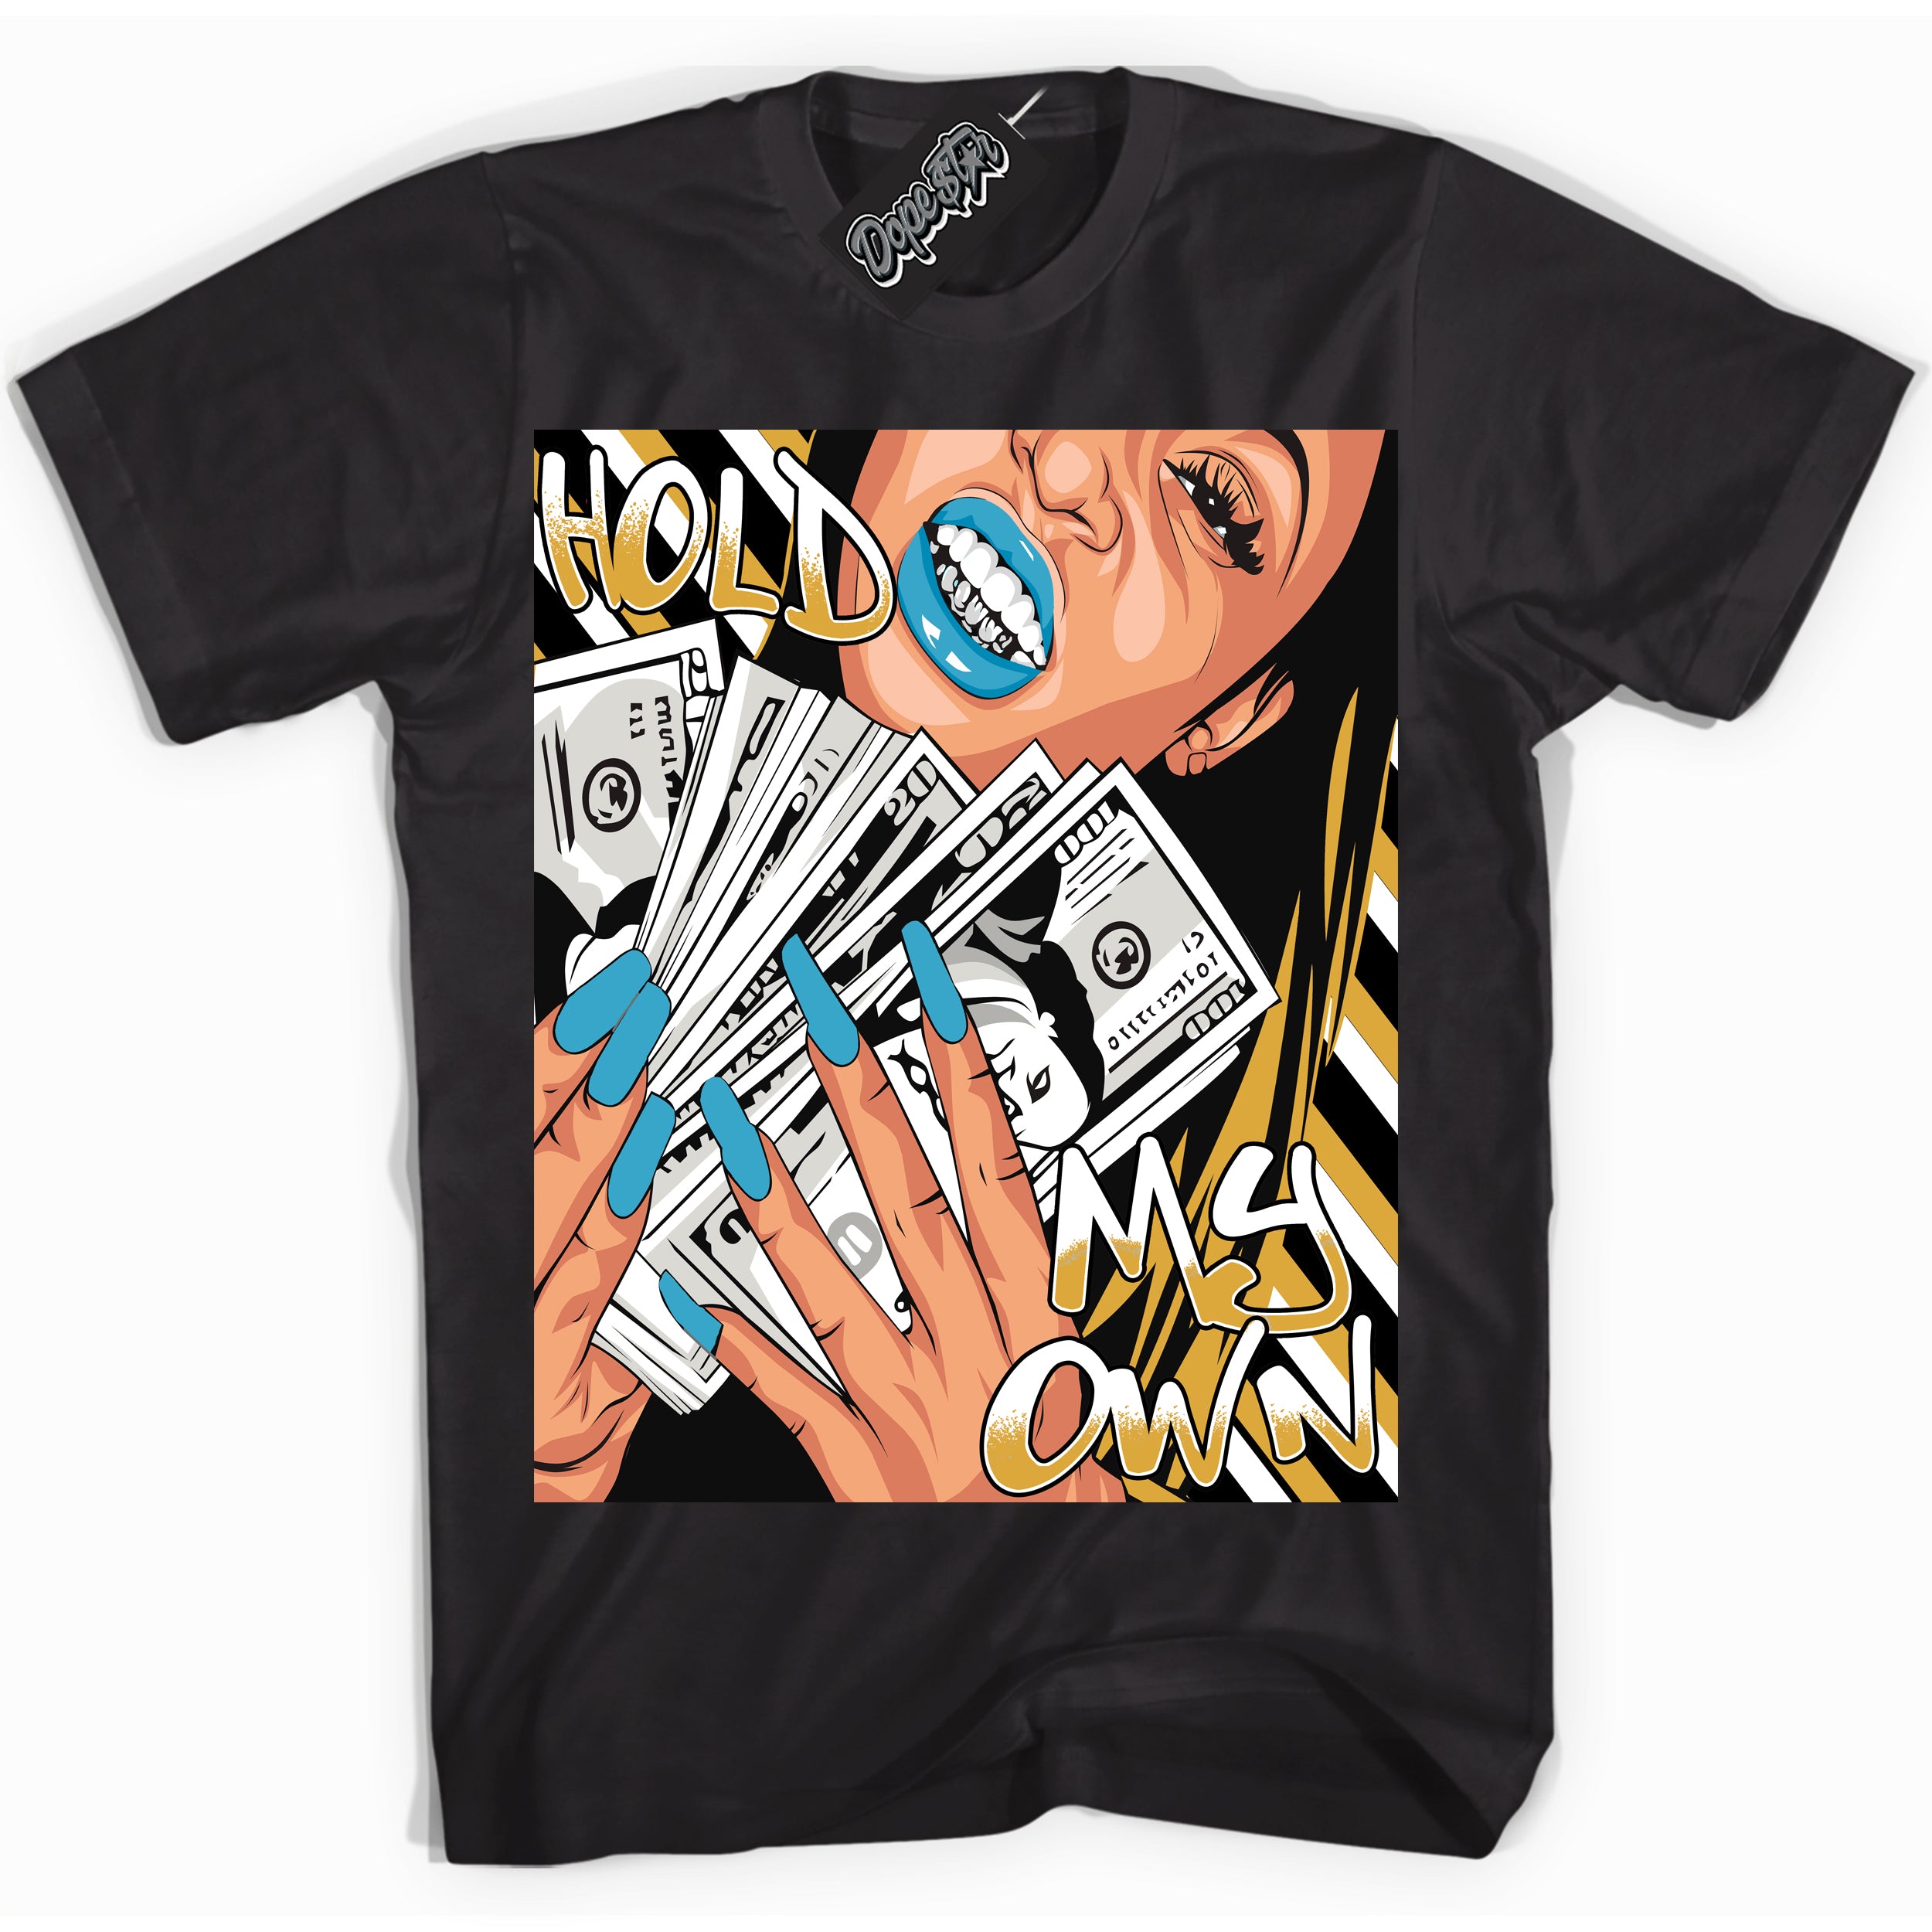 Cool Black Shirt with “ Hold My Own” design that perfectly matches Aqua 5s Sneakers.